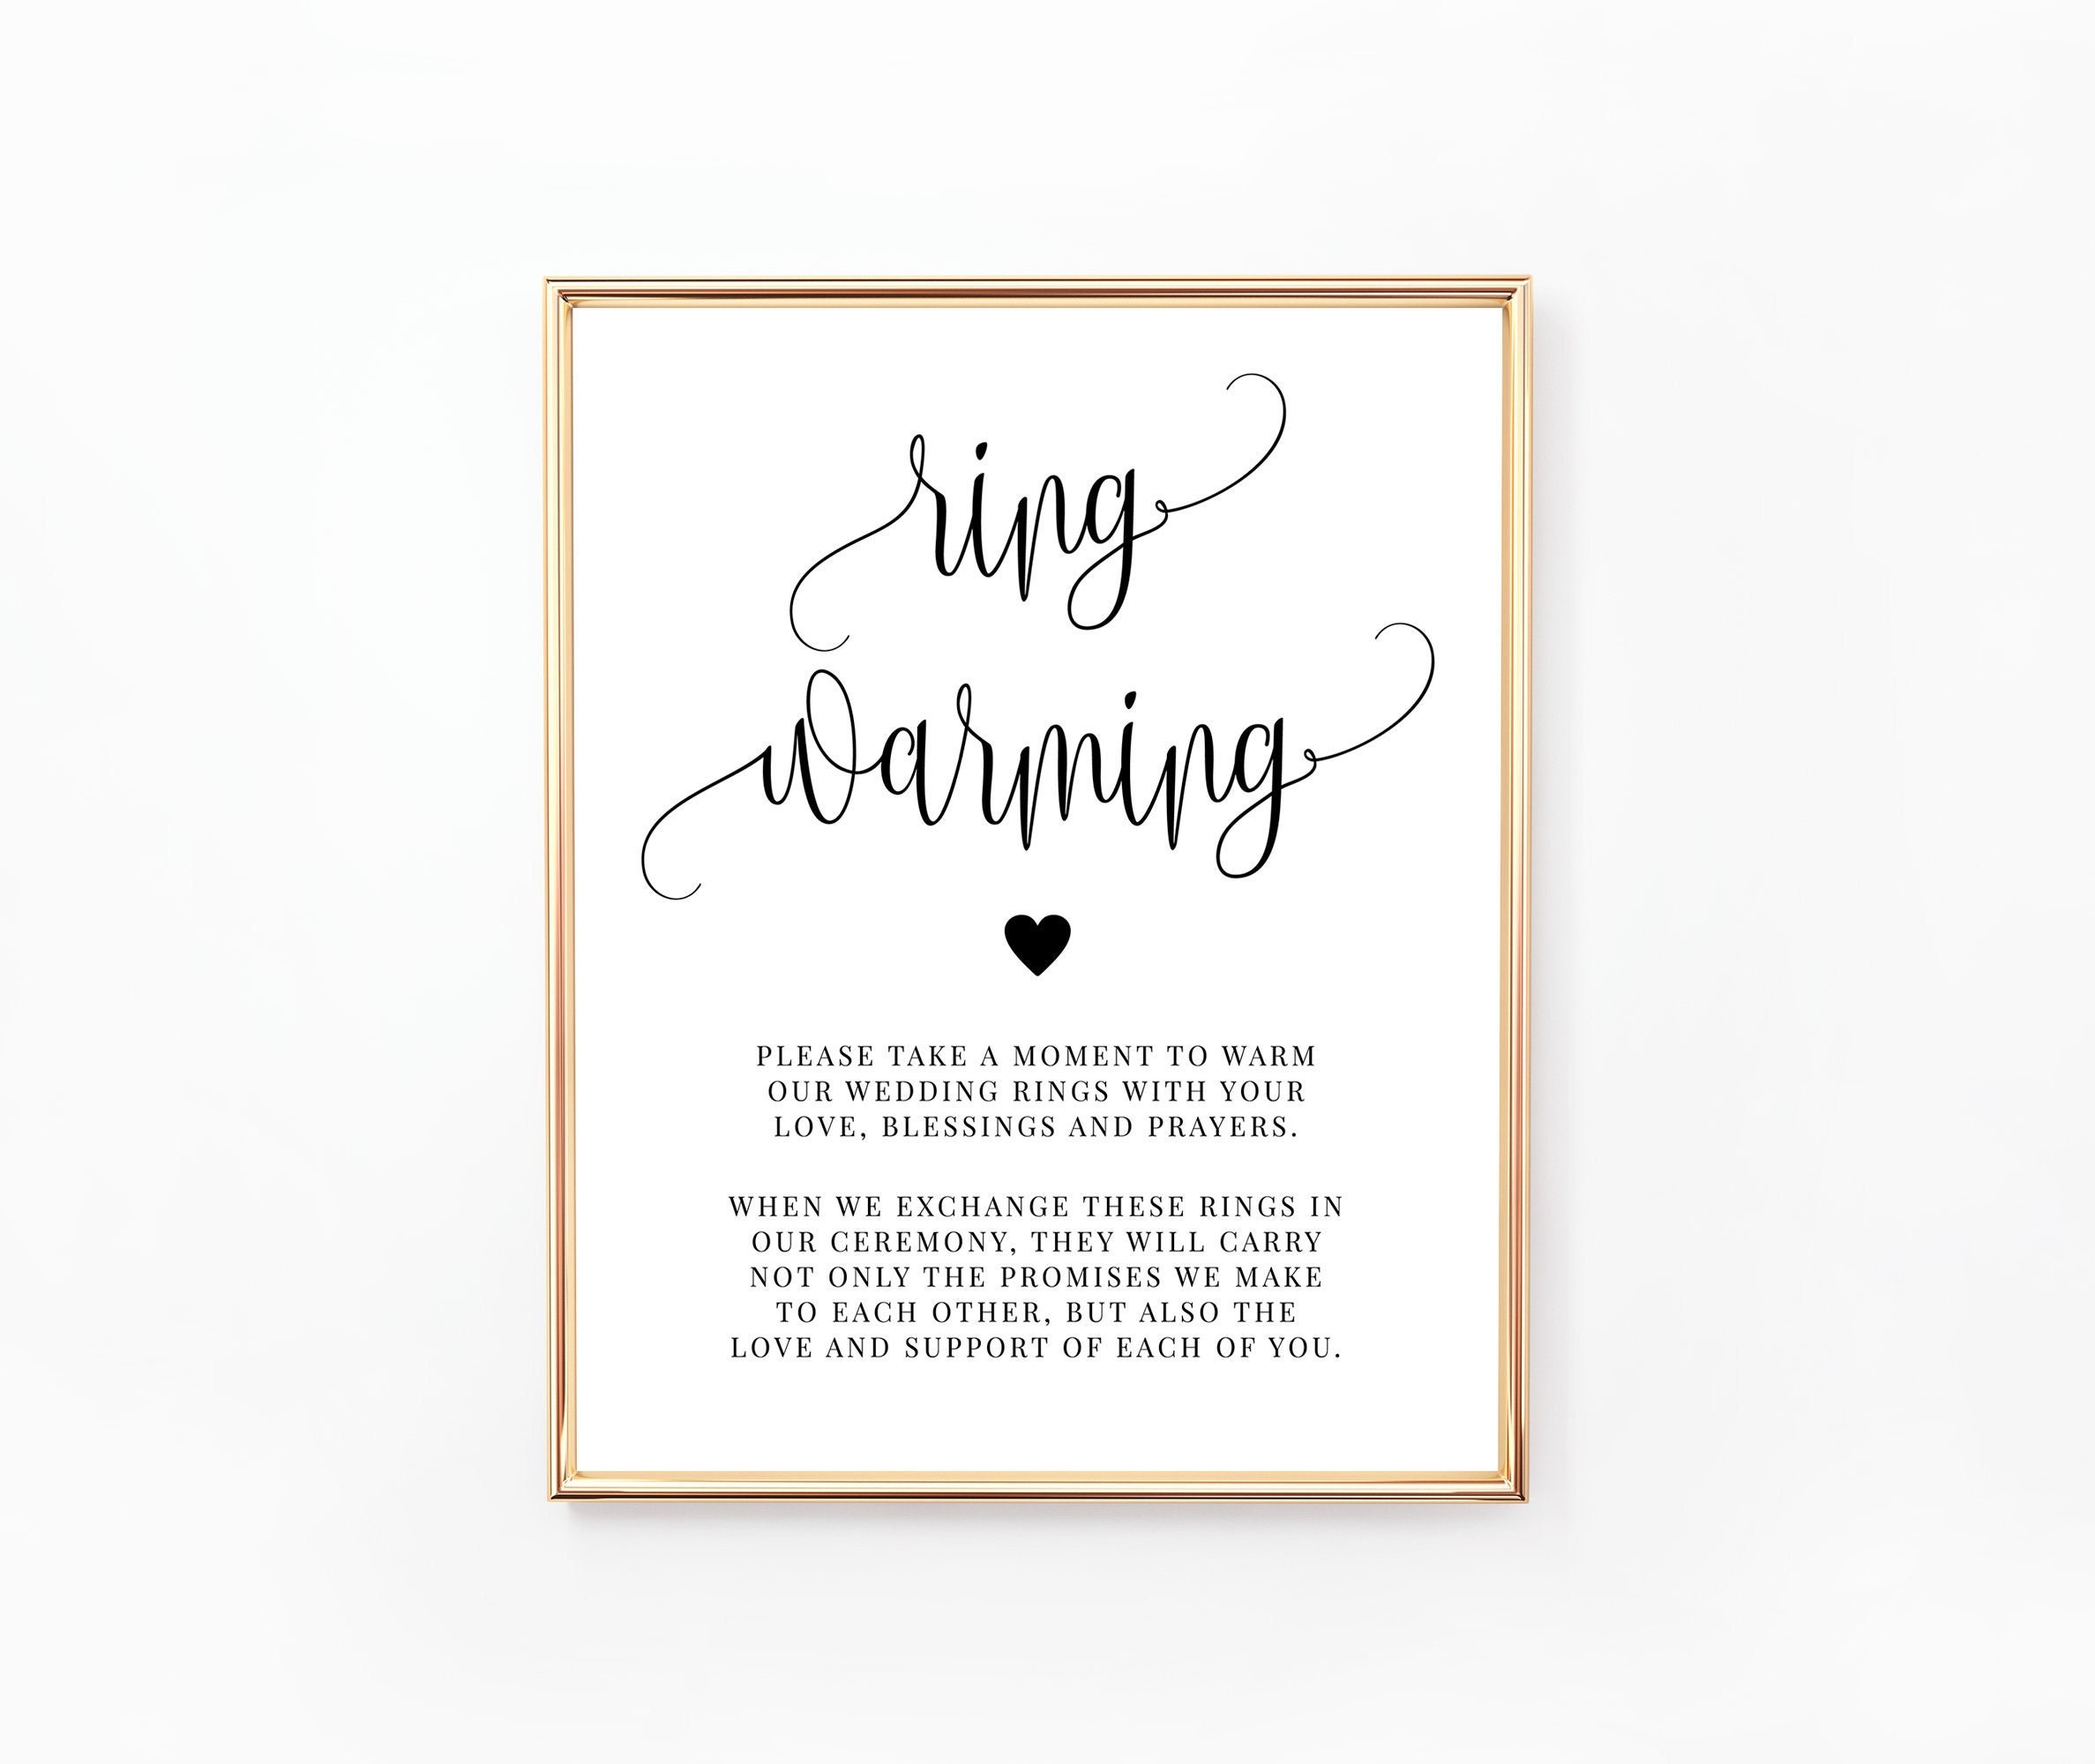 50 Funny Wedding Vows for Your Ceremony - hitched.co.uk